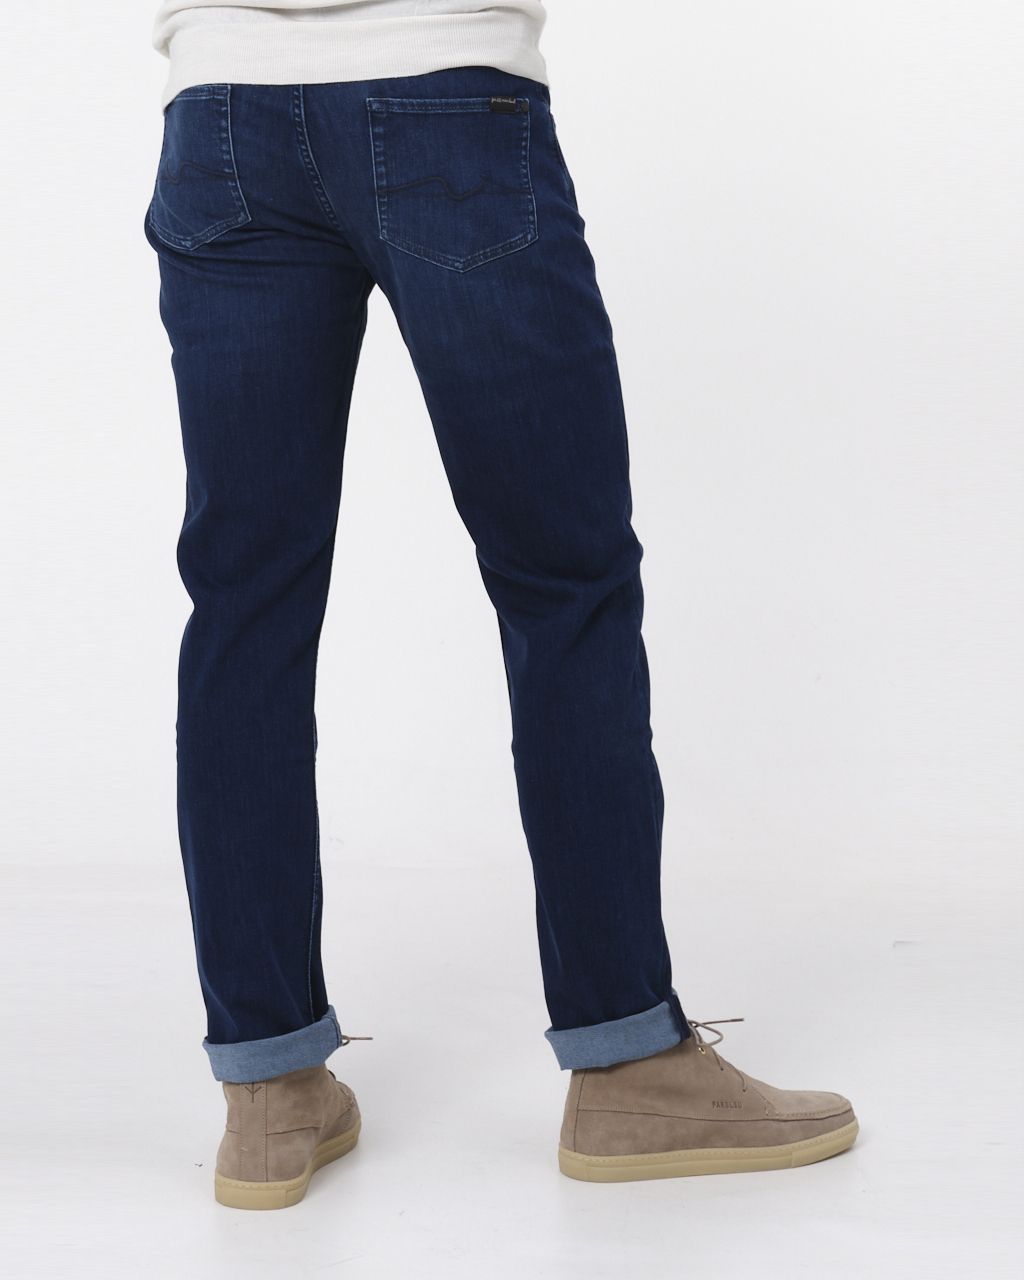 7 For All Mankind Slimmy Tapered Jeans Denim 076335-001-30